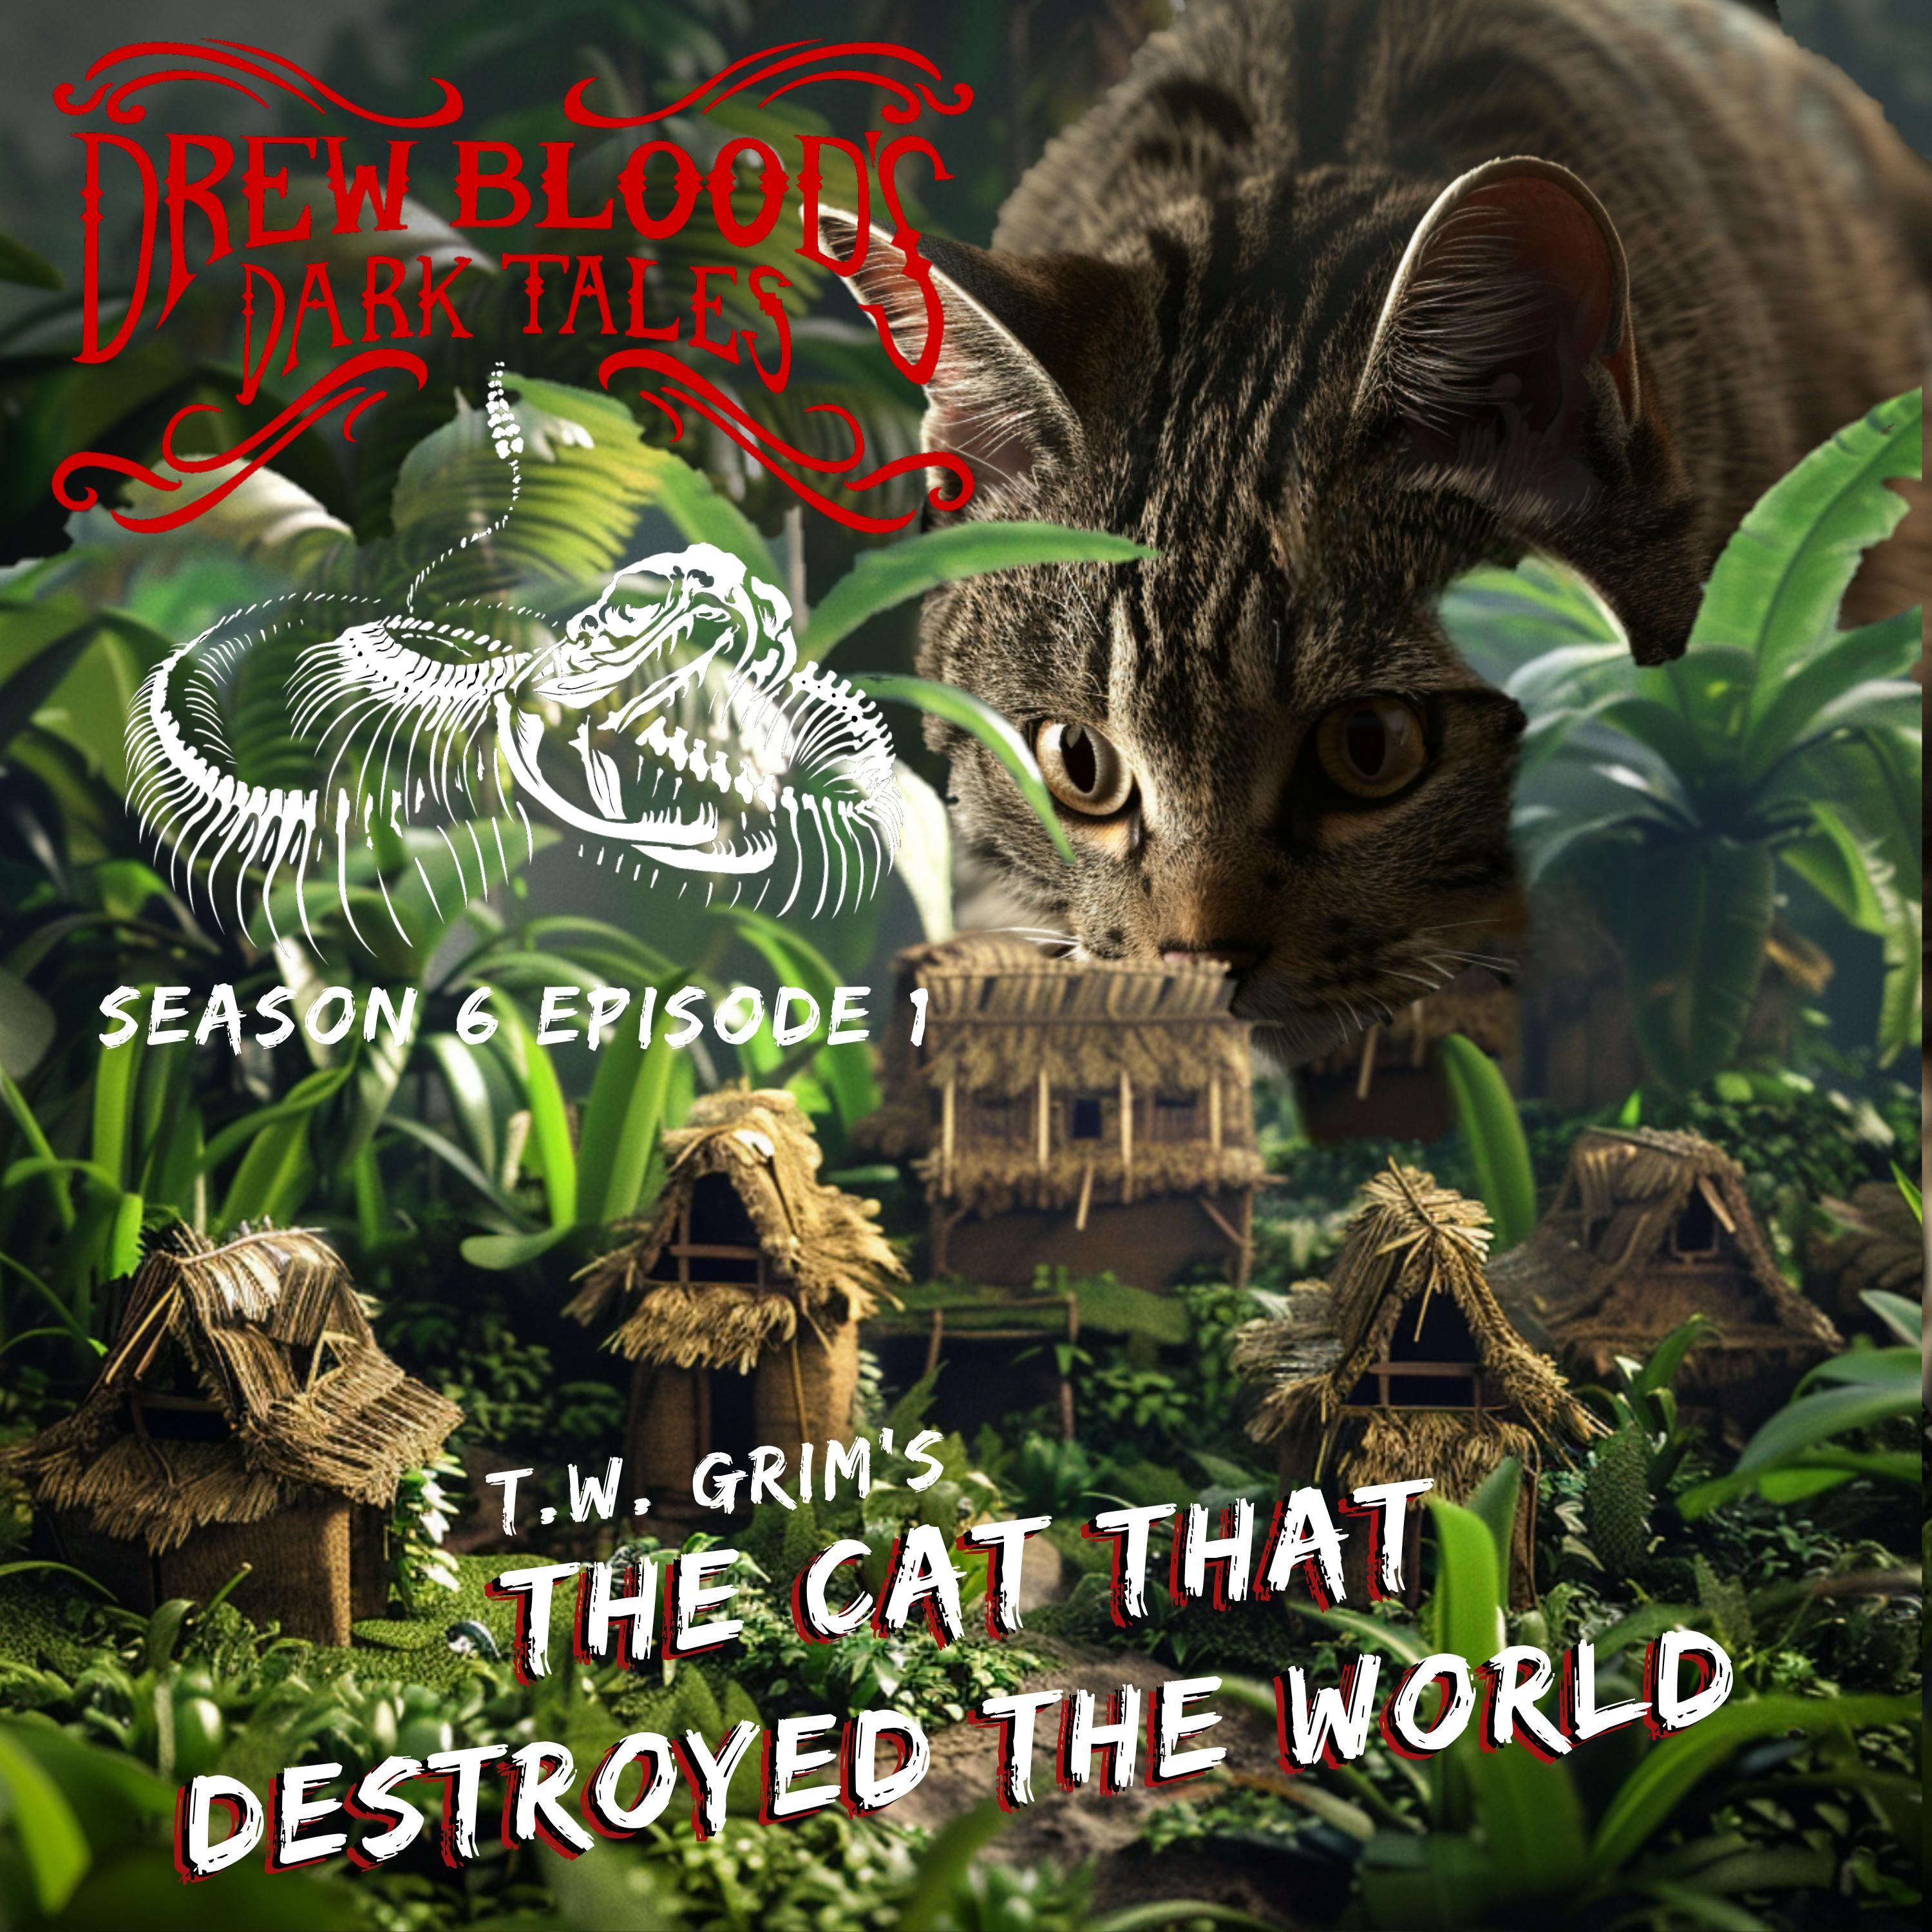 S6E01 - "The Cat that Destroyed the World:" - Drew Blood